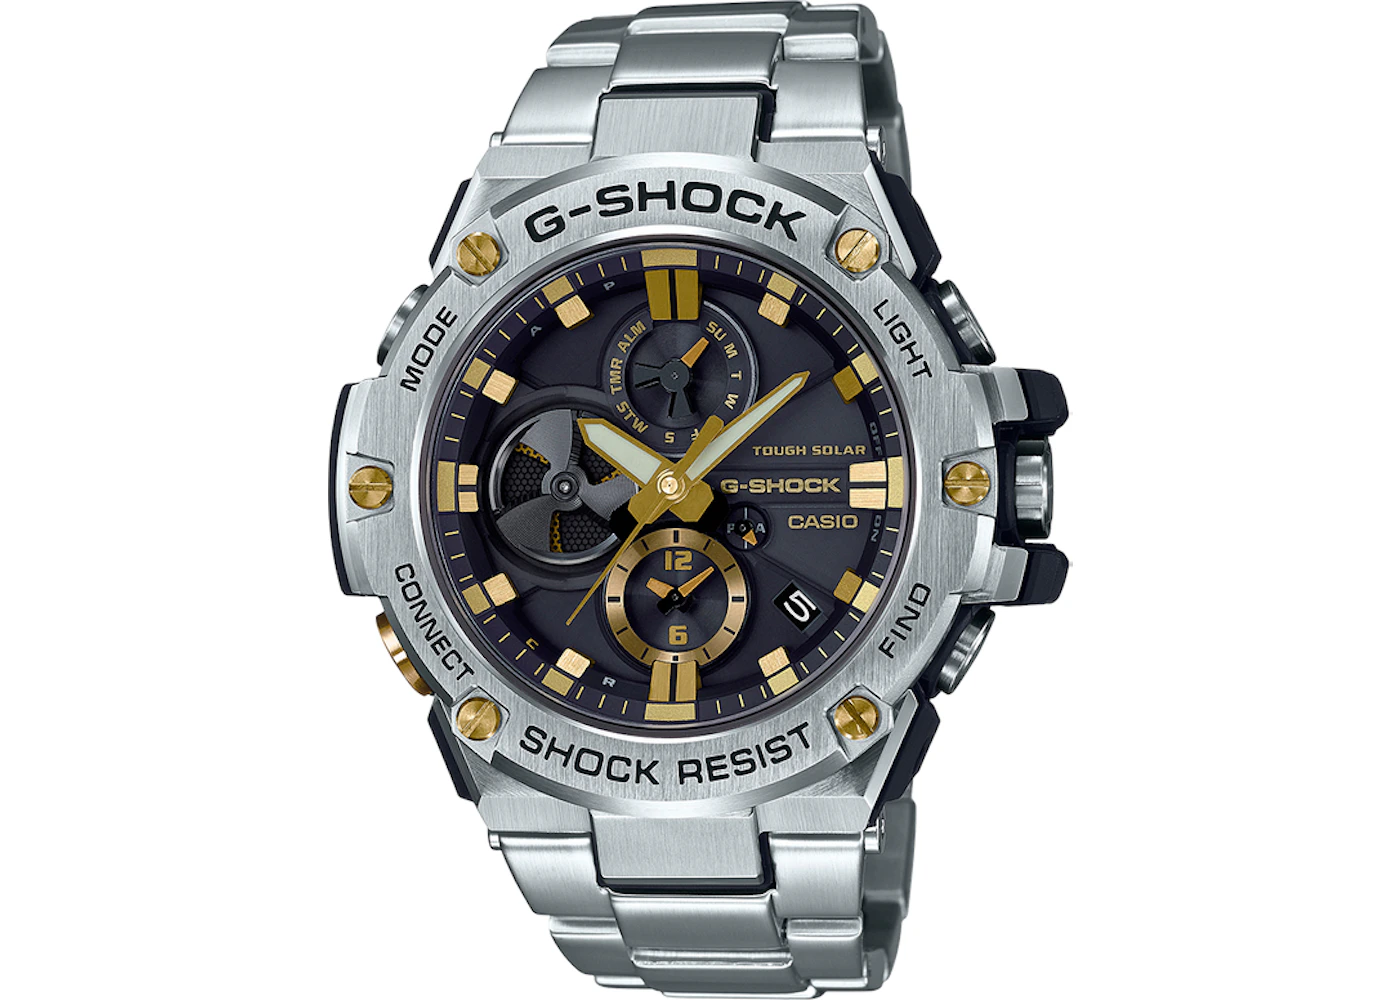 Casio G-Shock GSTB100D-1A9 - 54mm in Stainless Steel - US